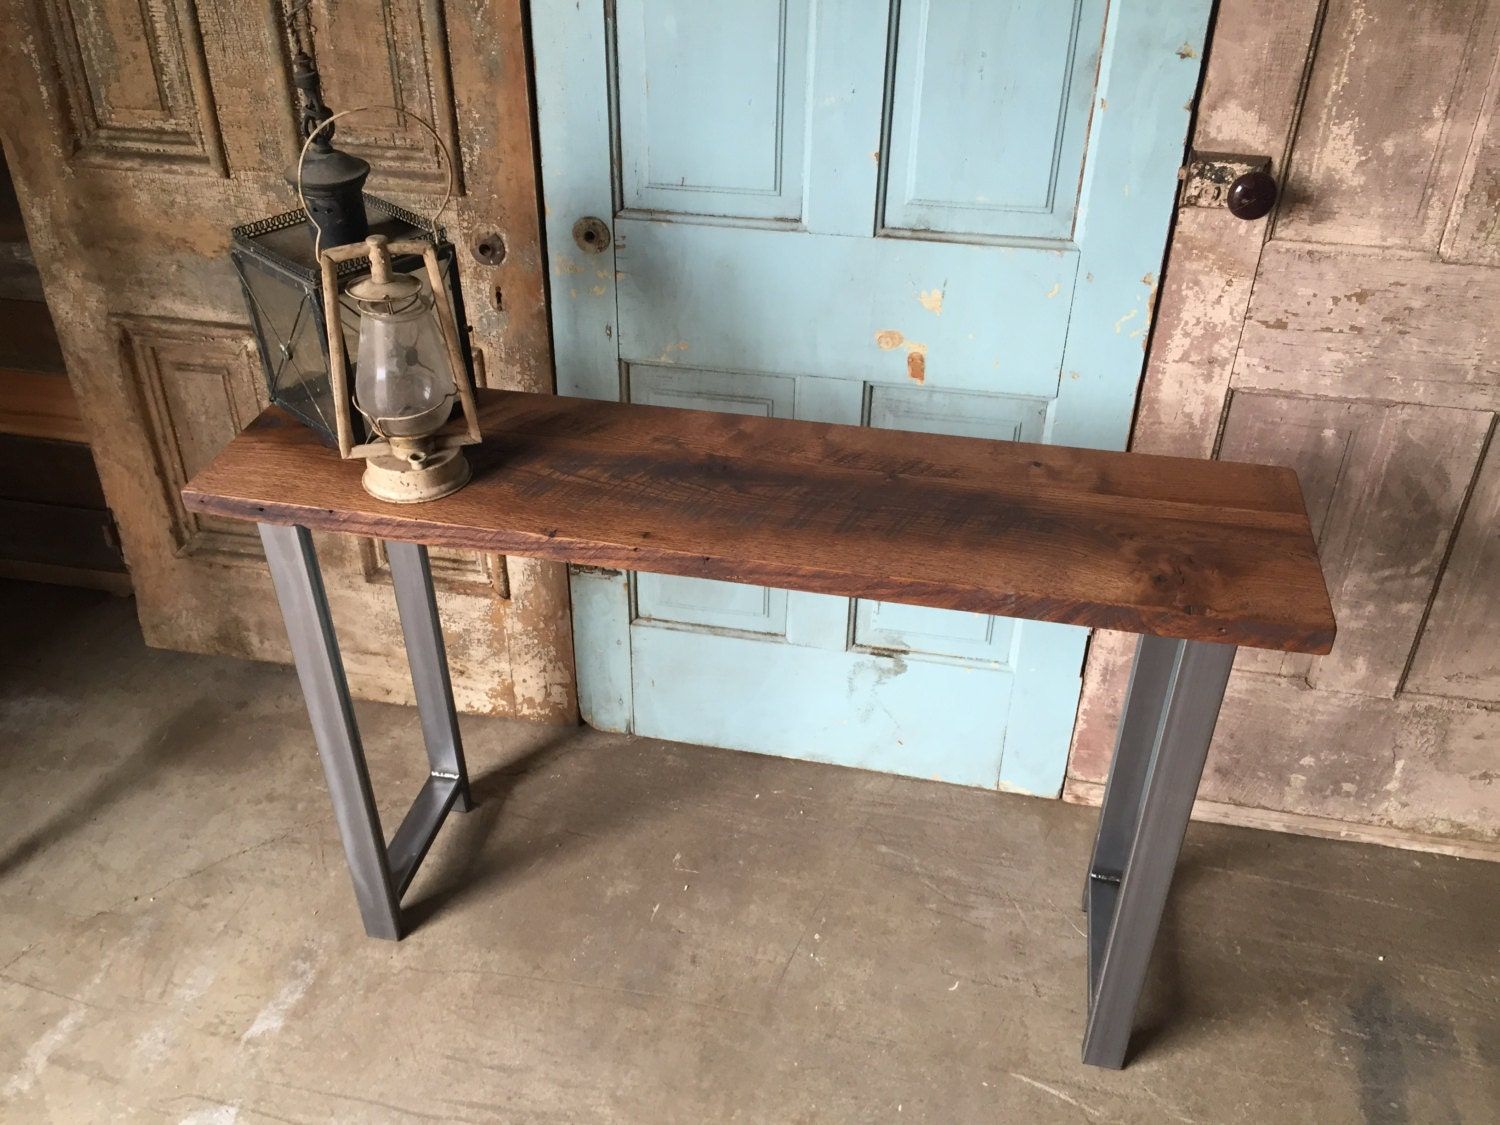 Reclaimed Wood Industrial Console Table / H Shaped Metal Legs Intended For Reclaimed Wood Console Tables (View 17 of 20)